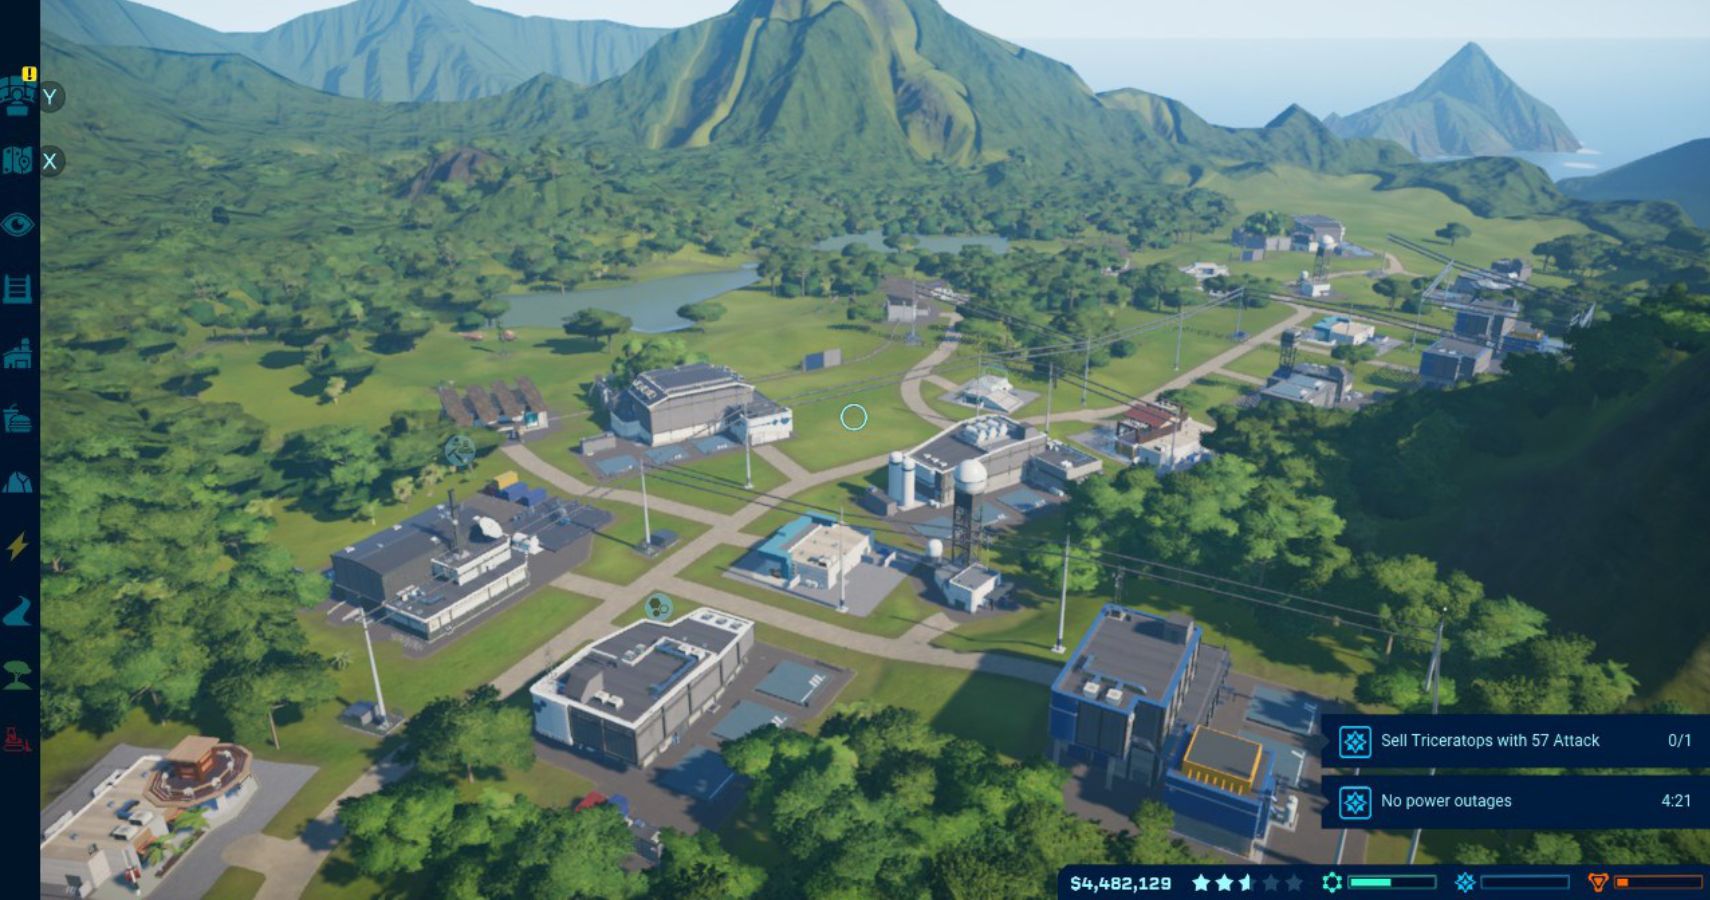 zoomed out view of Jurassic World park.